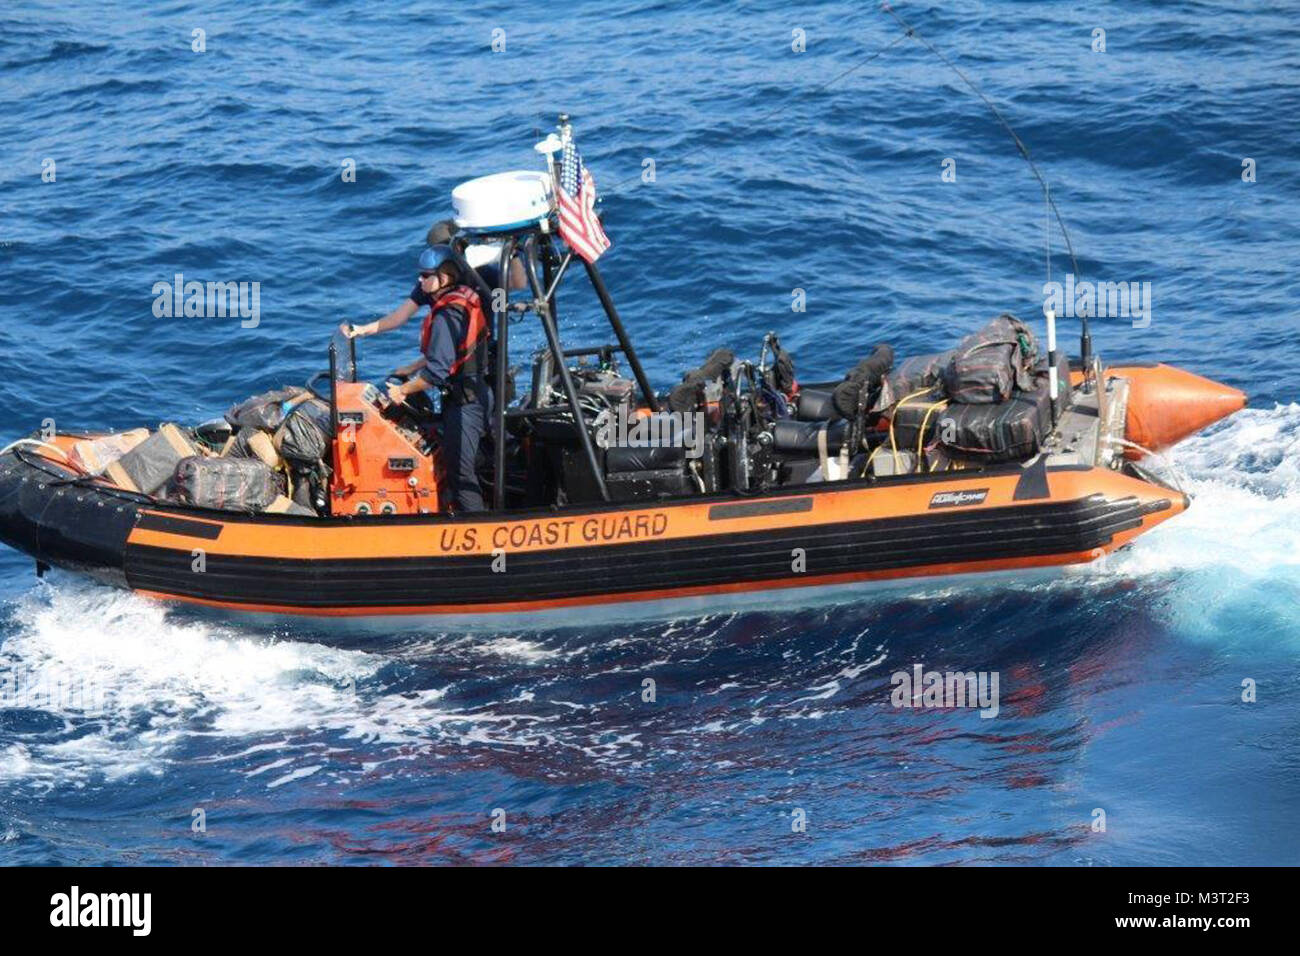 Coast Guard Cutter Valiant crew transports seized contraband from one of the eight vessels interdicted during their eight-week patrol in the Eastern Pacific. Before returning home to Naval Station Mayport, Florida March 9, 2016, the cutter seized approximately $141 million worth of contraband. These counter-drug interdictions were carried out as part of Operation Martillo, an international operation focused on sharing information and bringing together air, land, and maritime assets from the U.S. Department of Defense, the Department of Homeland Security, and Western Hemisphere and European par Stock Photo